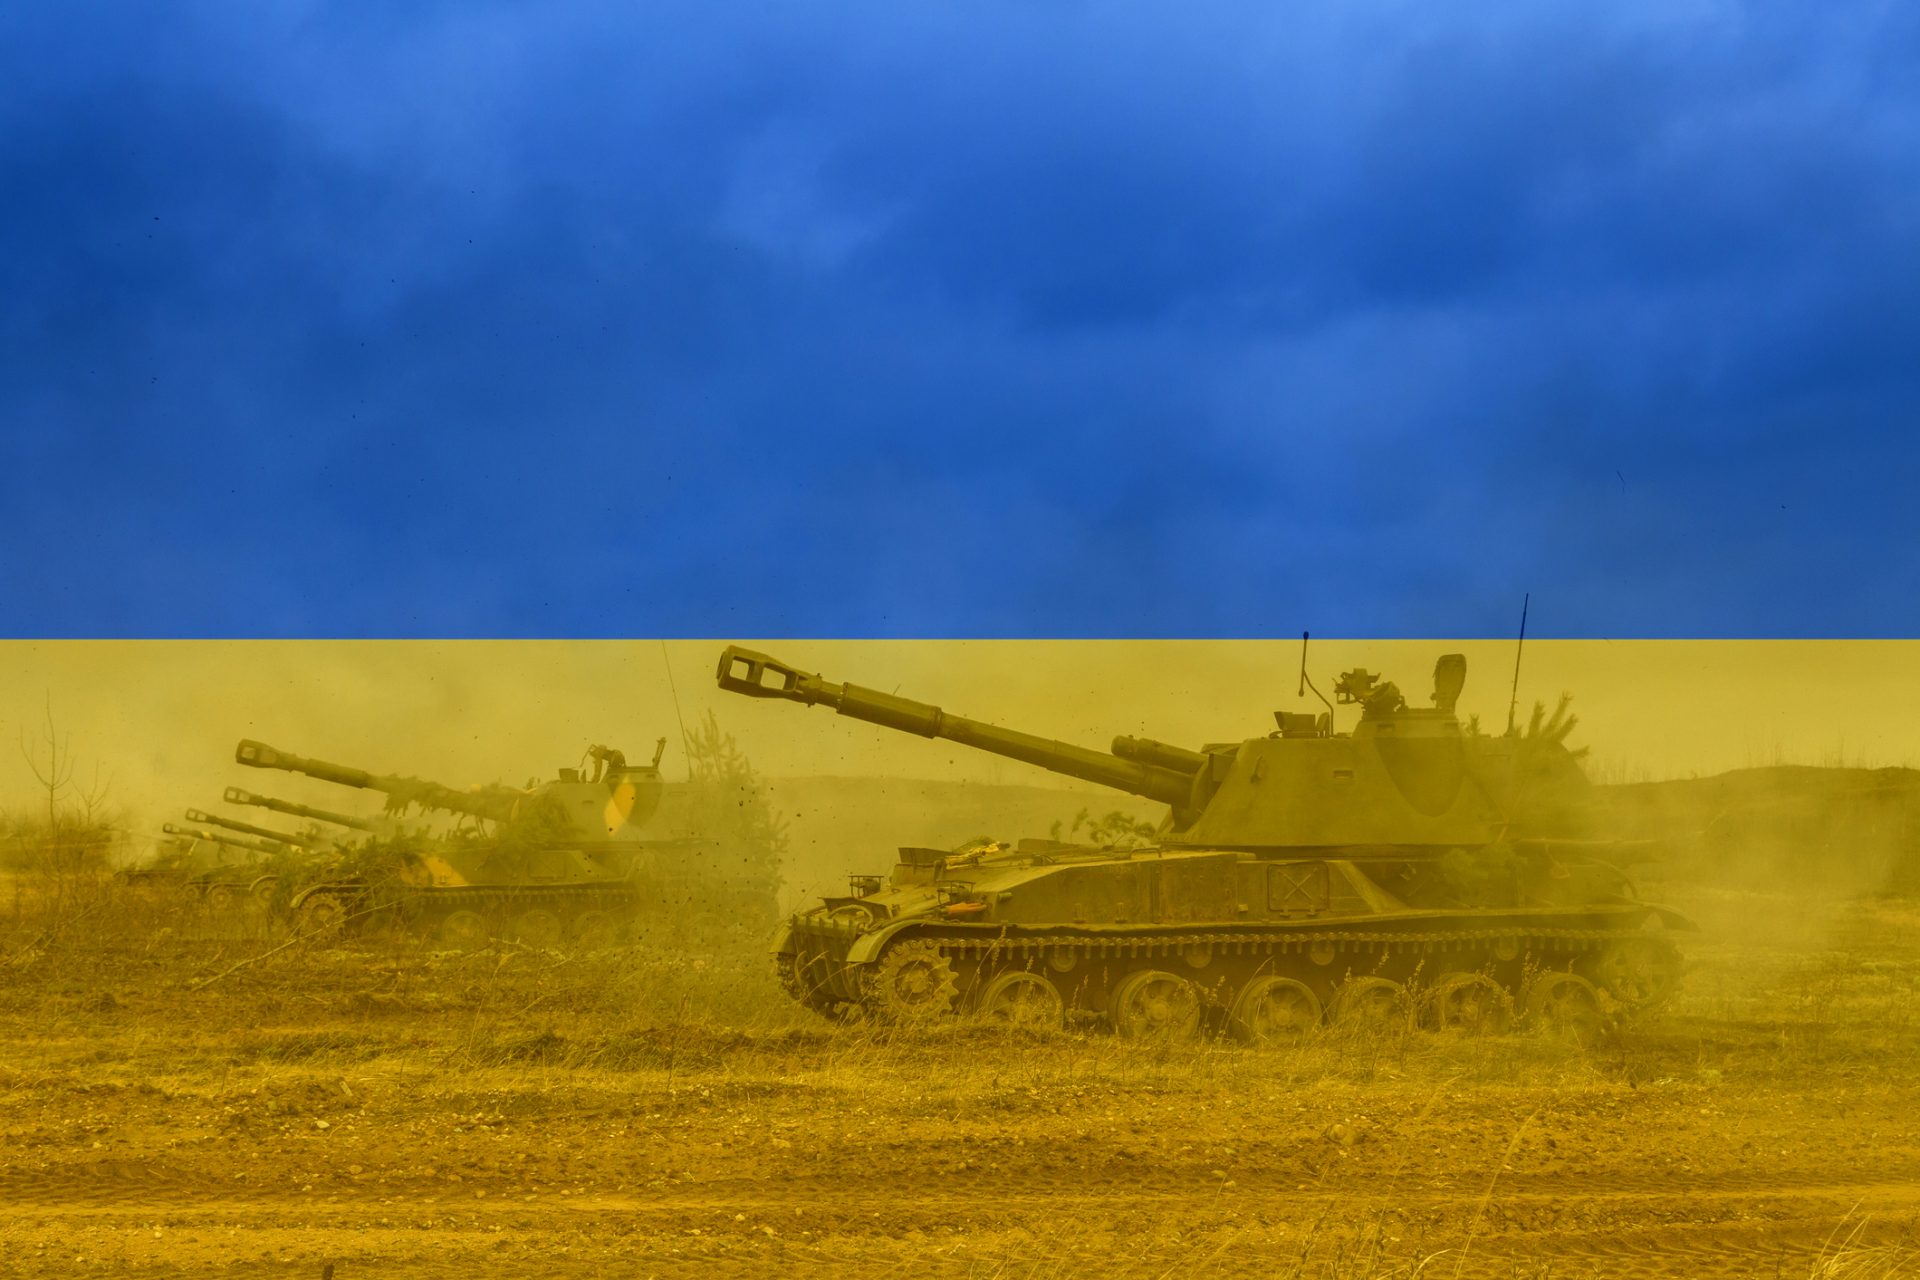 Ukraine can beat Russia if the conflict turns into an attritional war